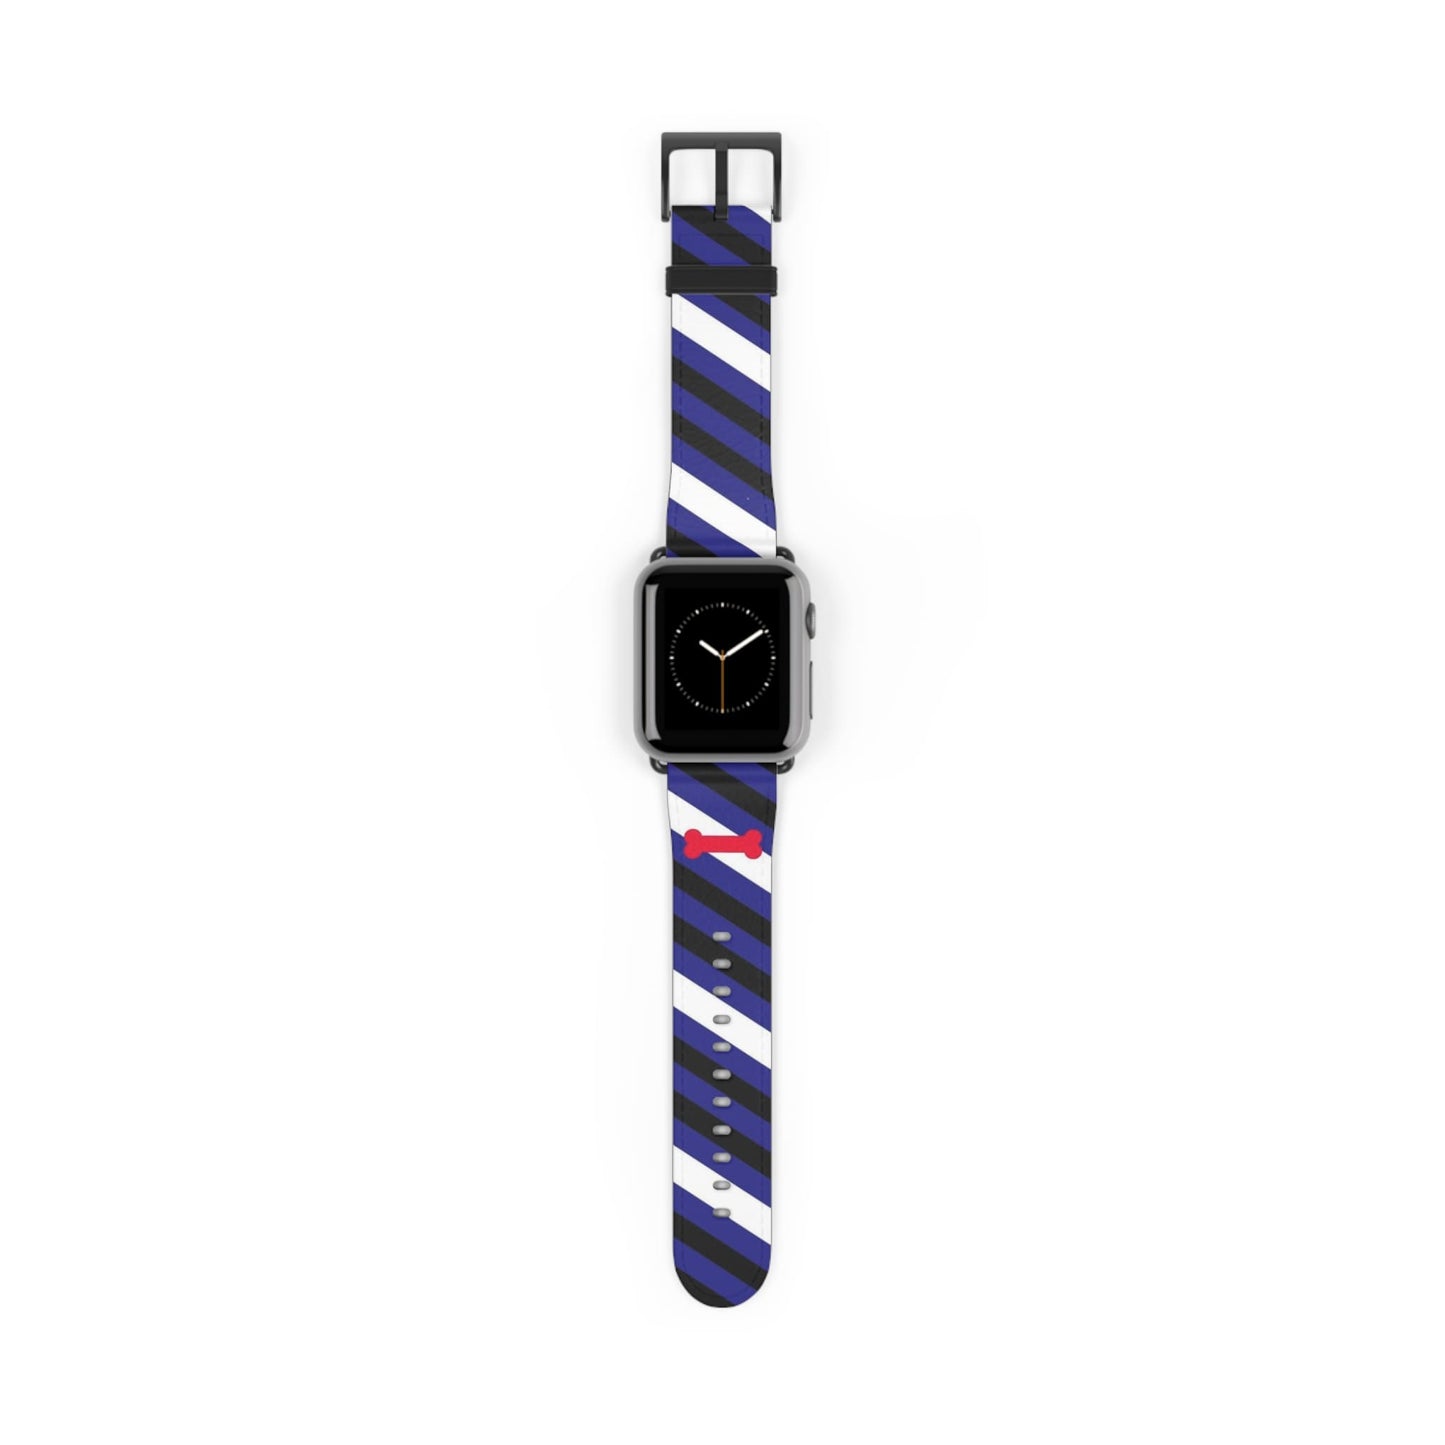 puppy play pride watch band for Apple iwatch, black